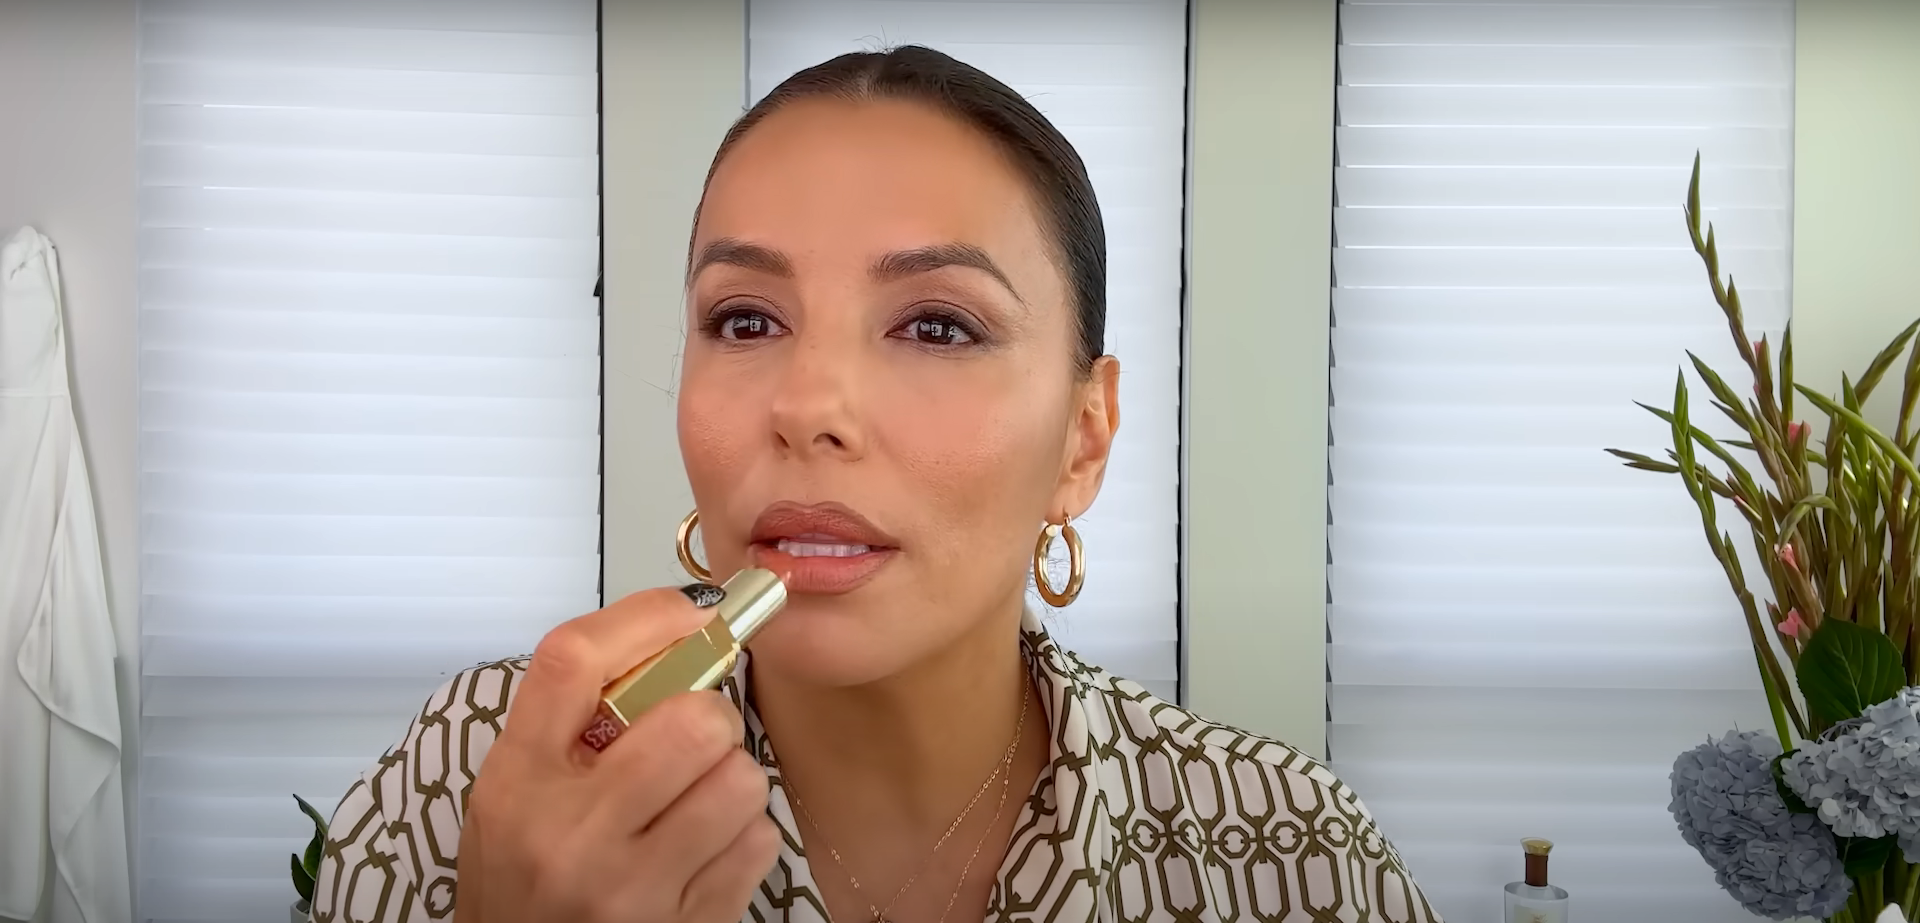 Desperate Housewives star Eva Longoria shows off her face without eyelashes and makeup